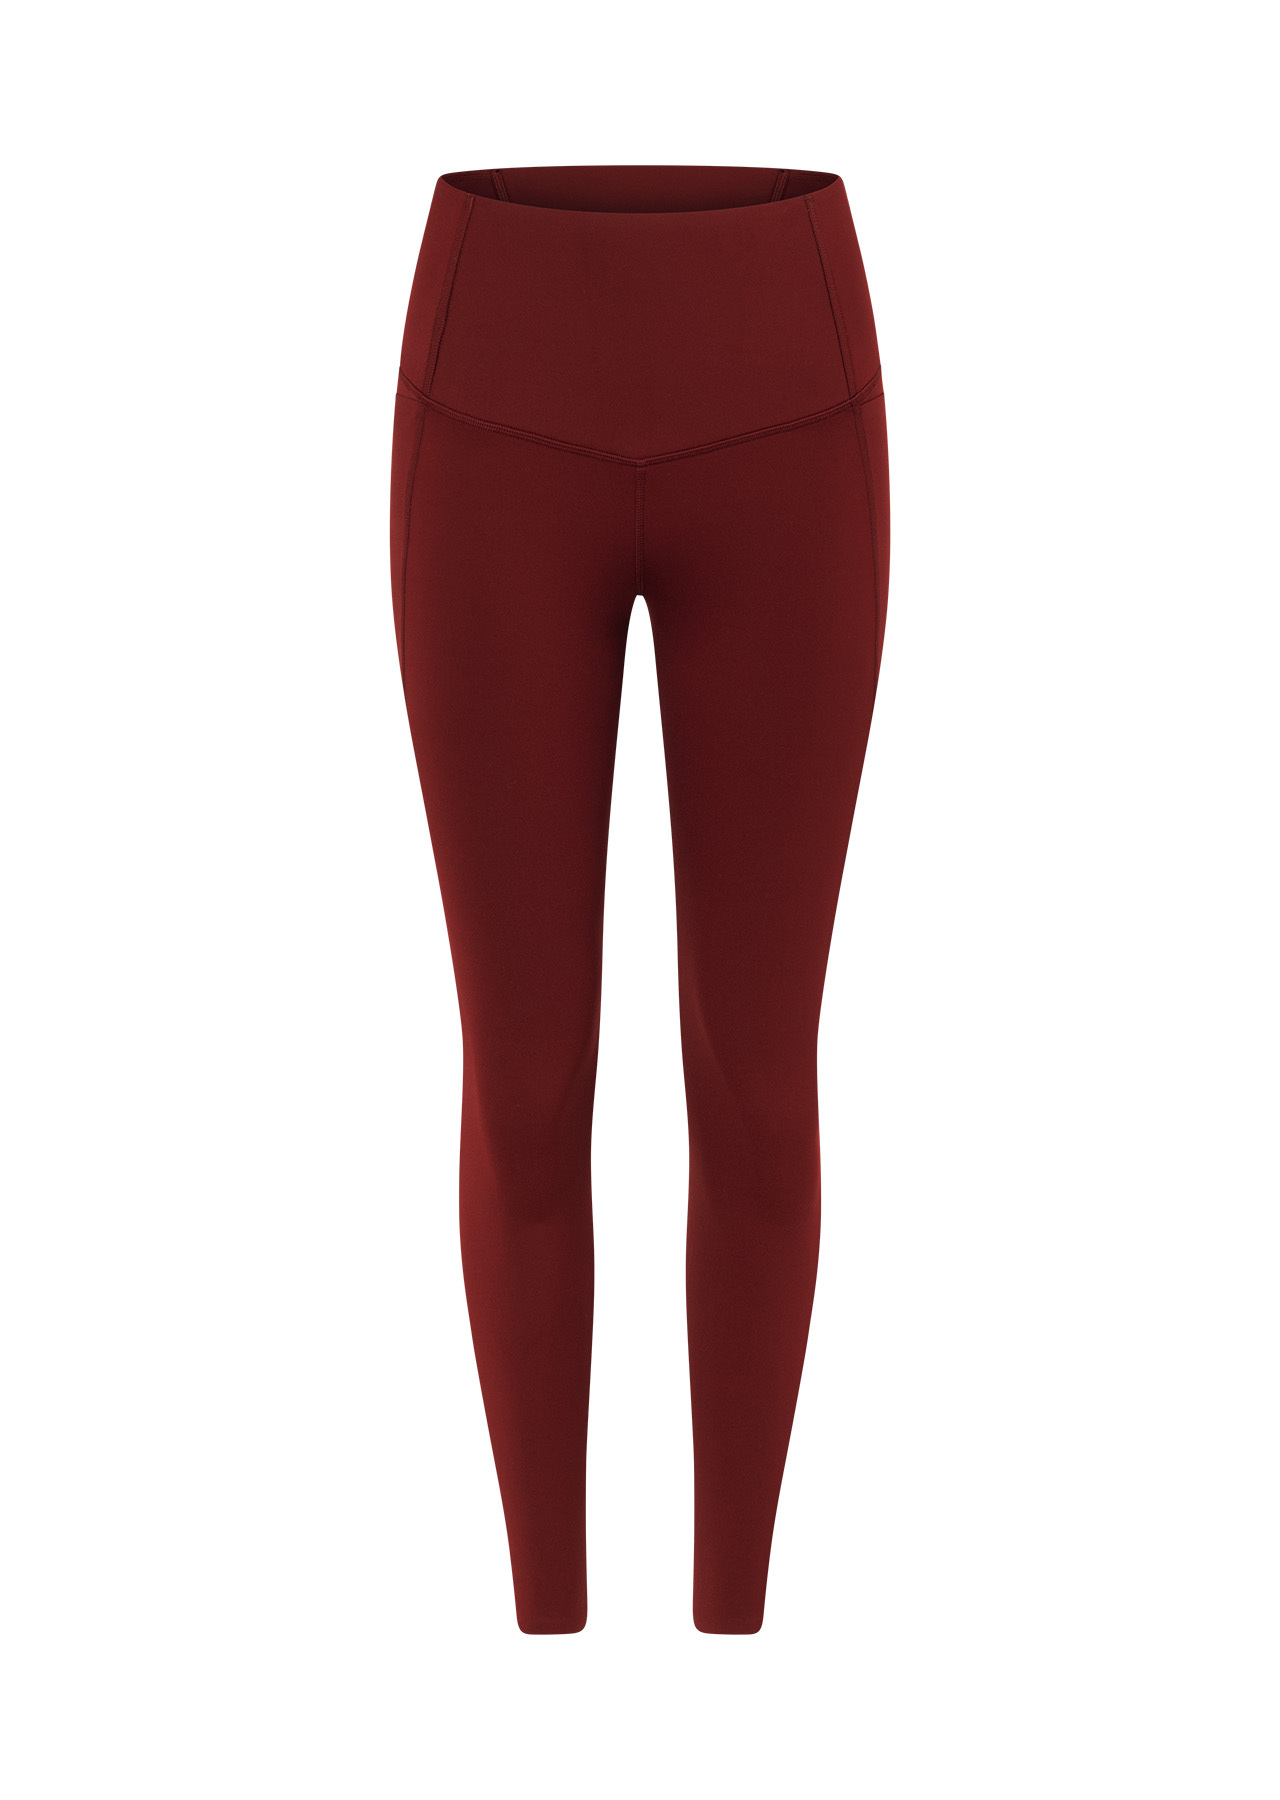 The Perfect Ankle Biter Leggings | Red | Lorna Jane USA